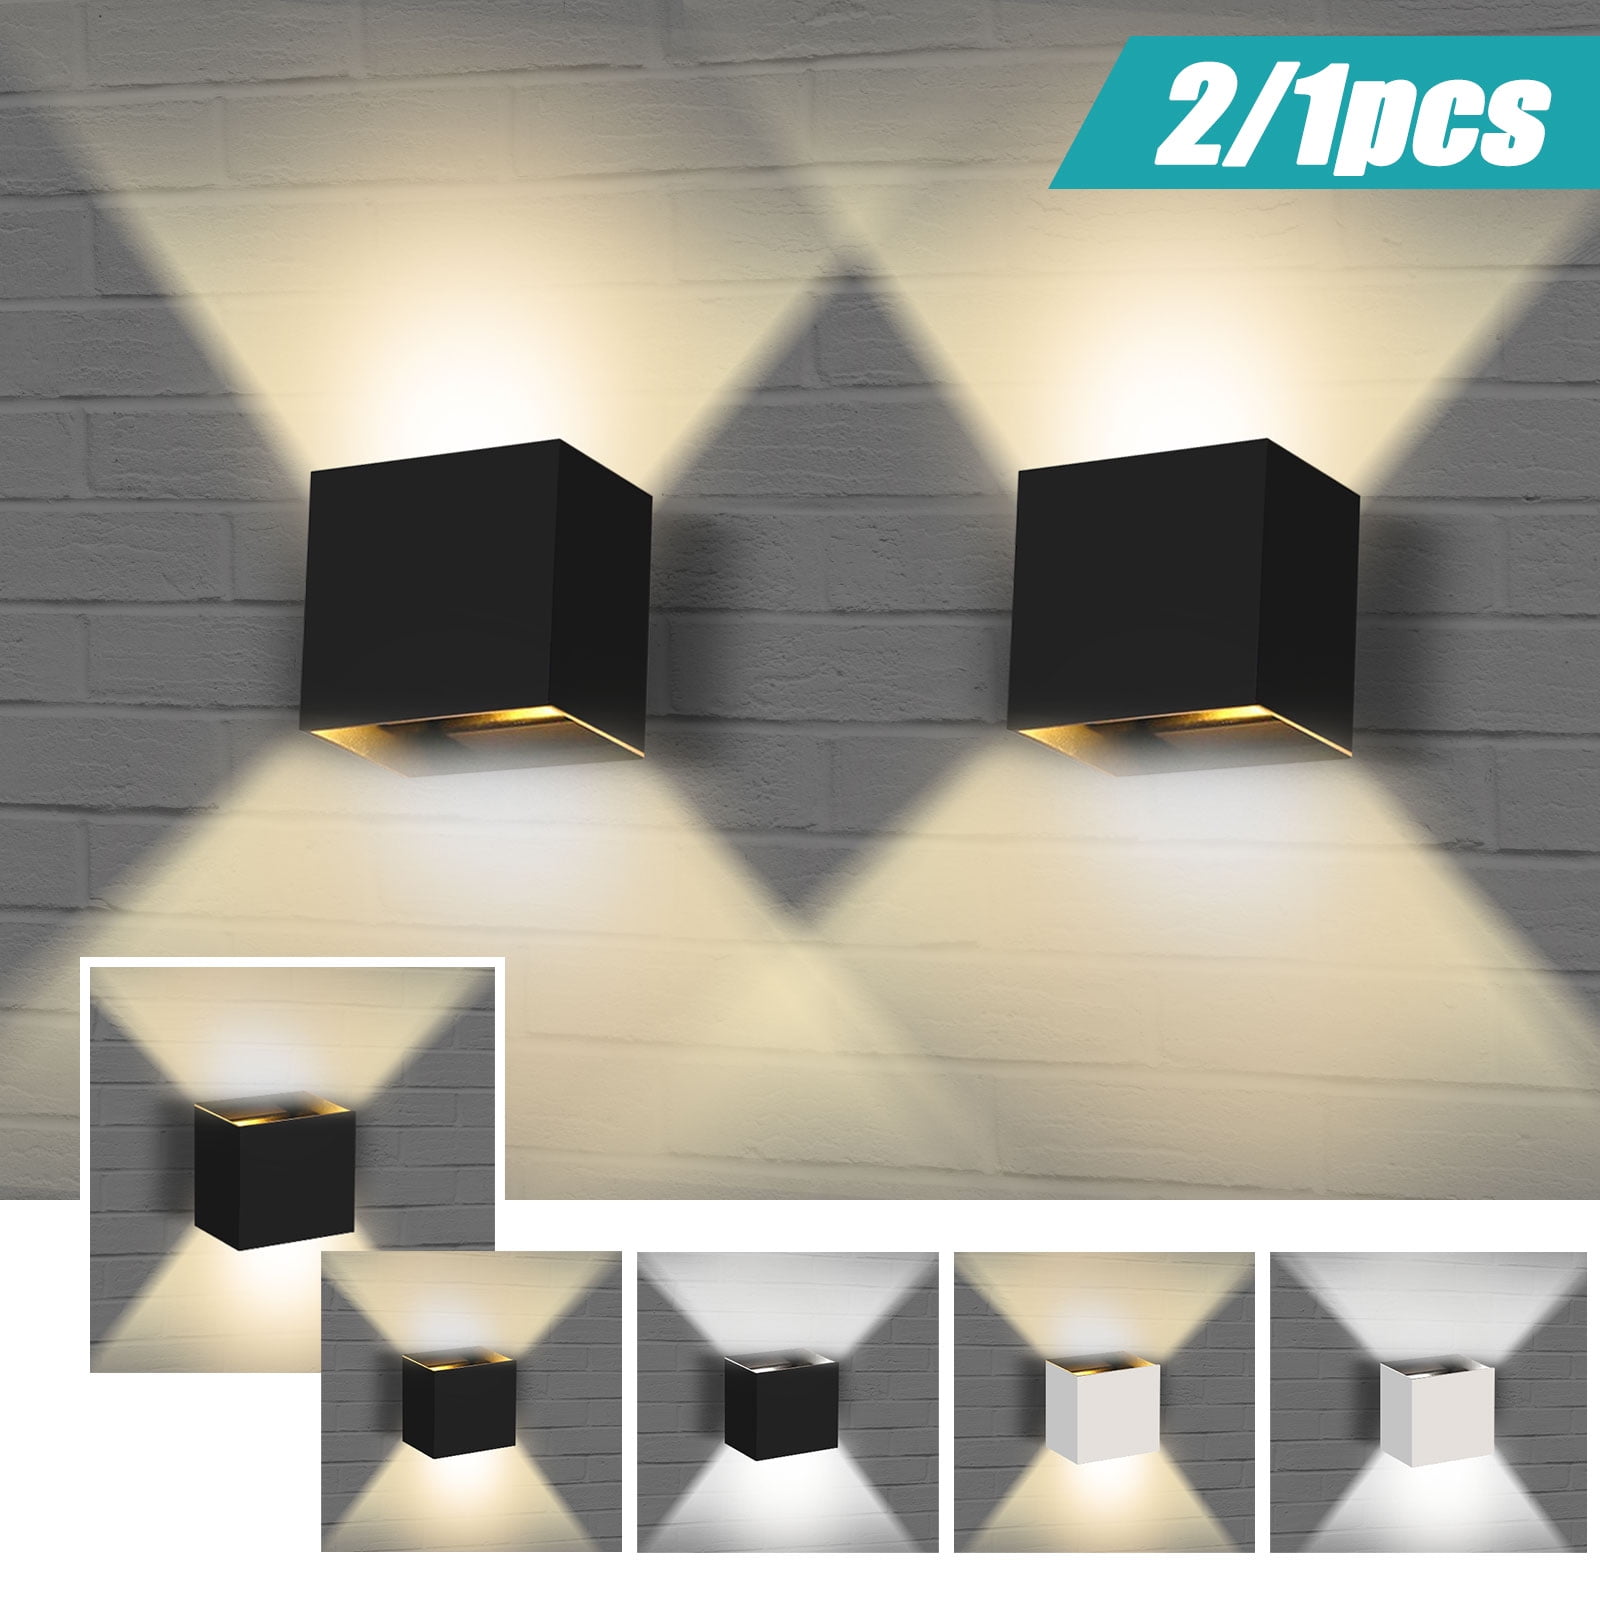 Modern LED Wall Light Up Down Cube Indoor Bedroom Sconce Lighting Lamp Fixture 